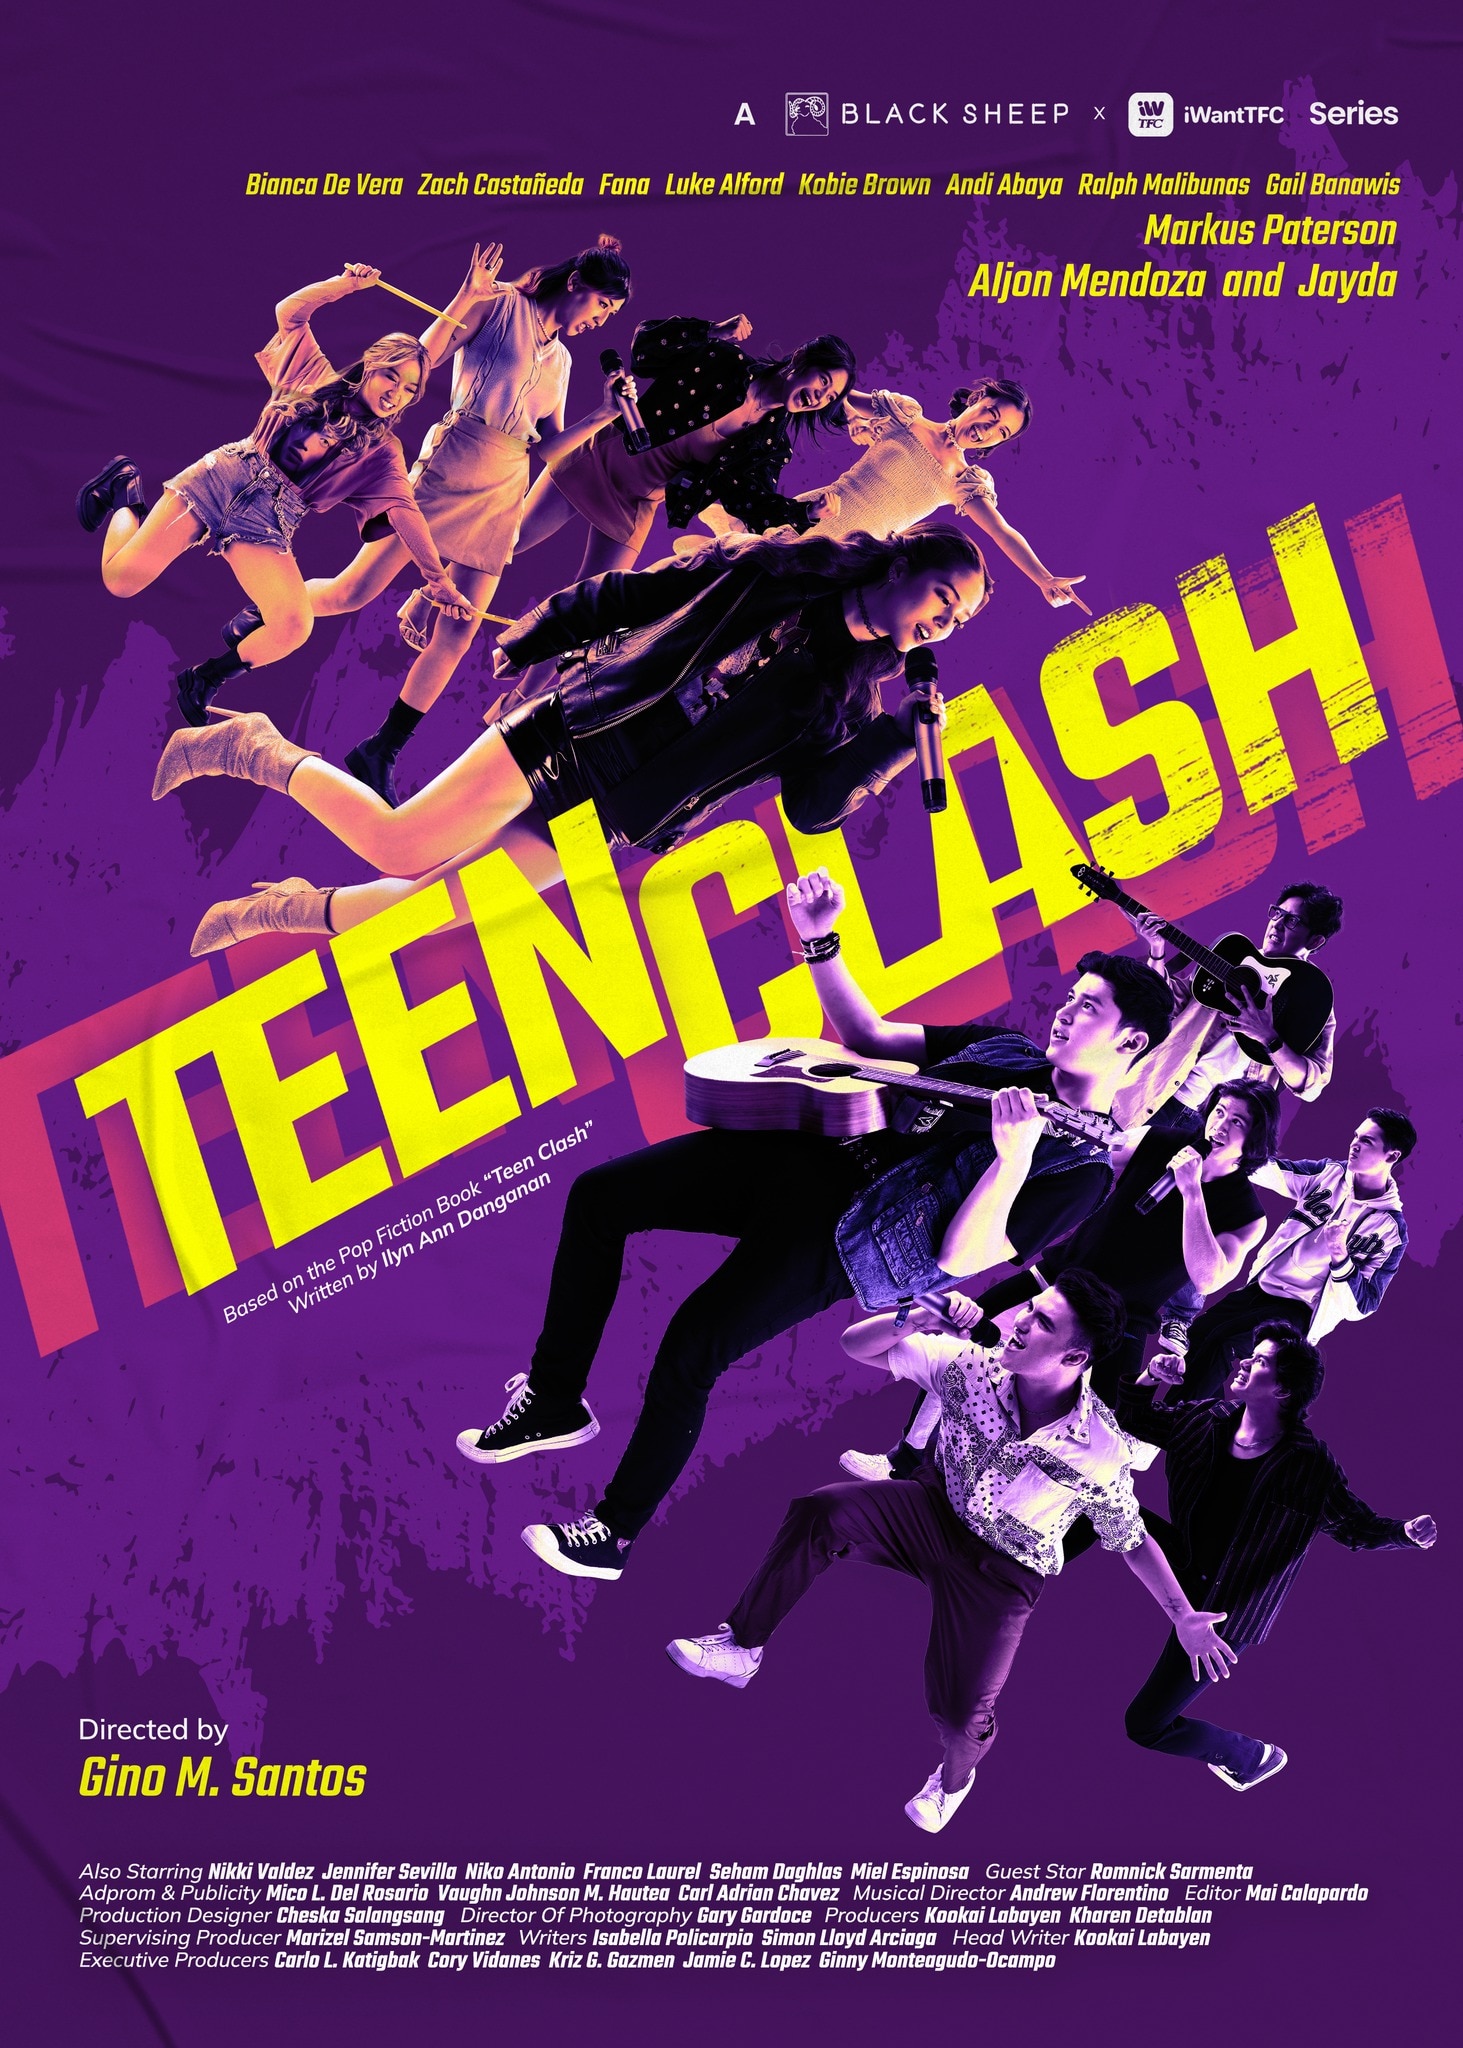 _Teen Clash_ official poster